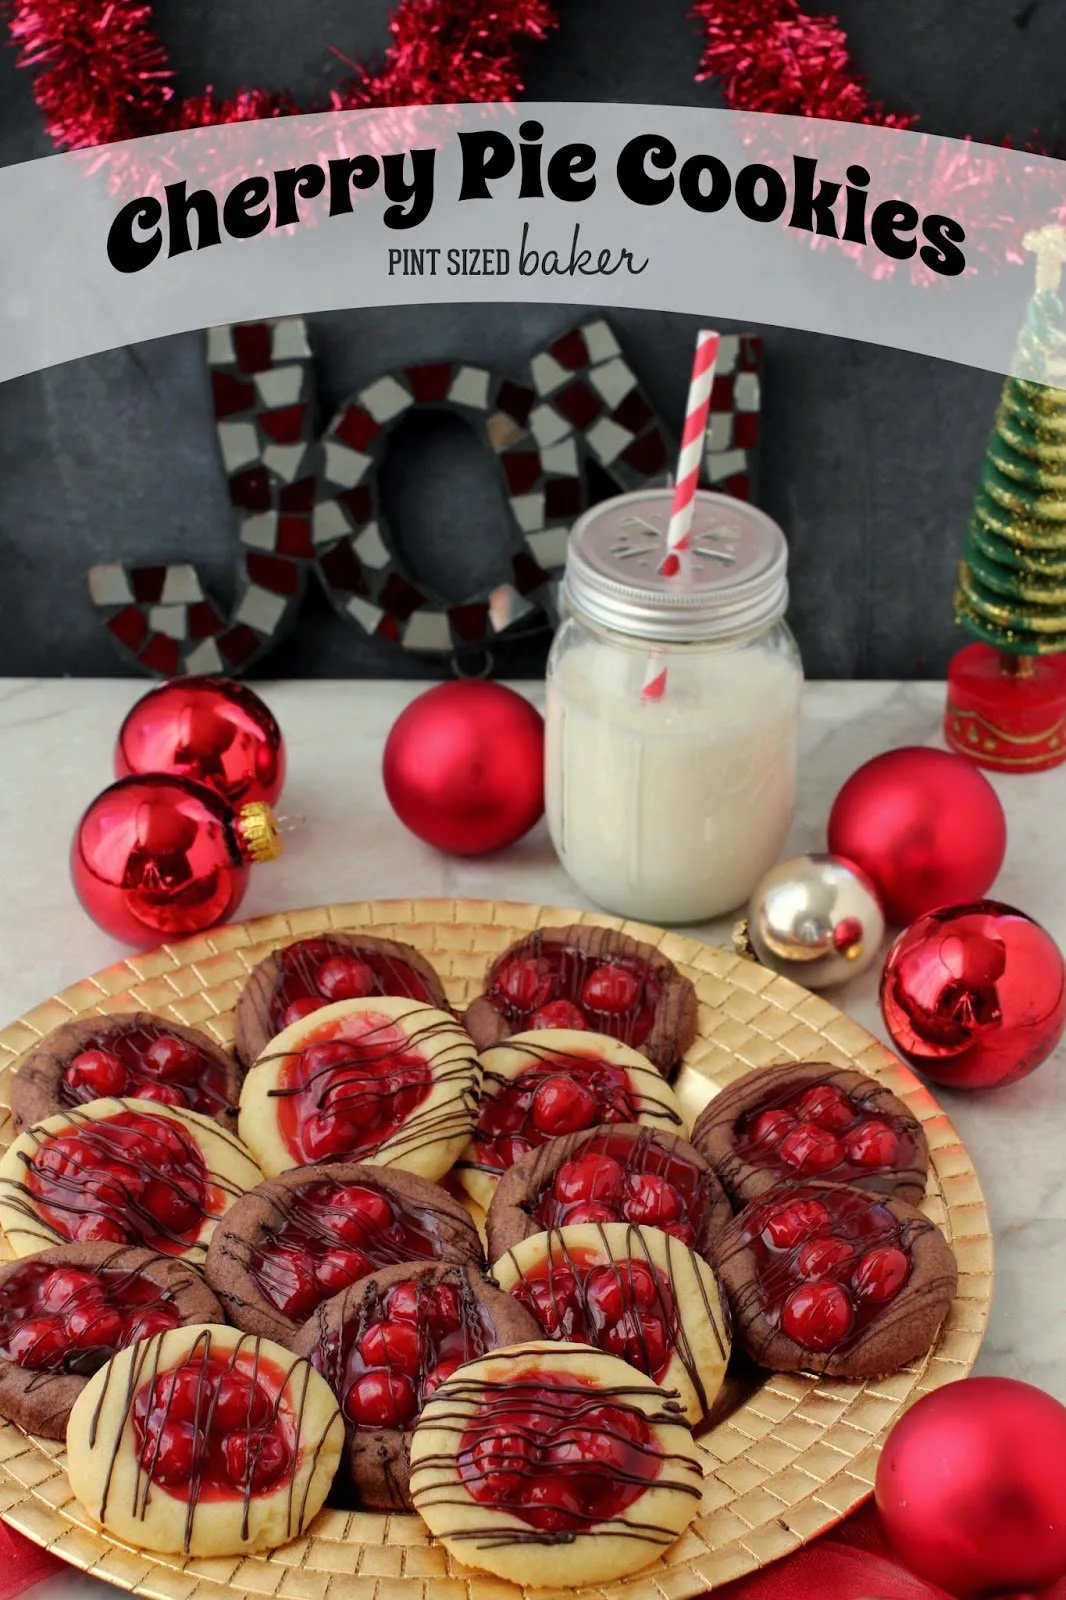 Enjoy the flavor of a cherry pie in these fun and easy Cherry Pie Thumbprint Cookies! You can also fill them with apple or blueberry to bake your favorite.